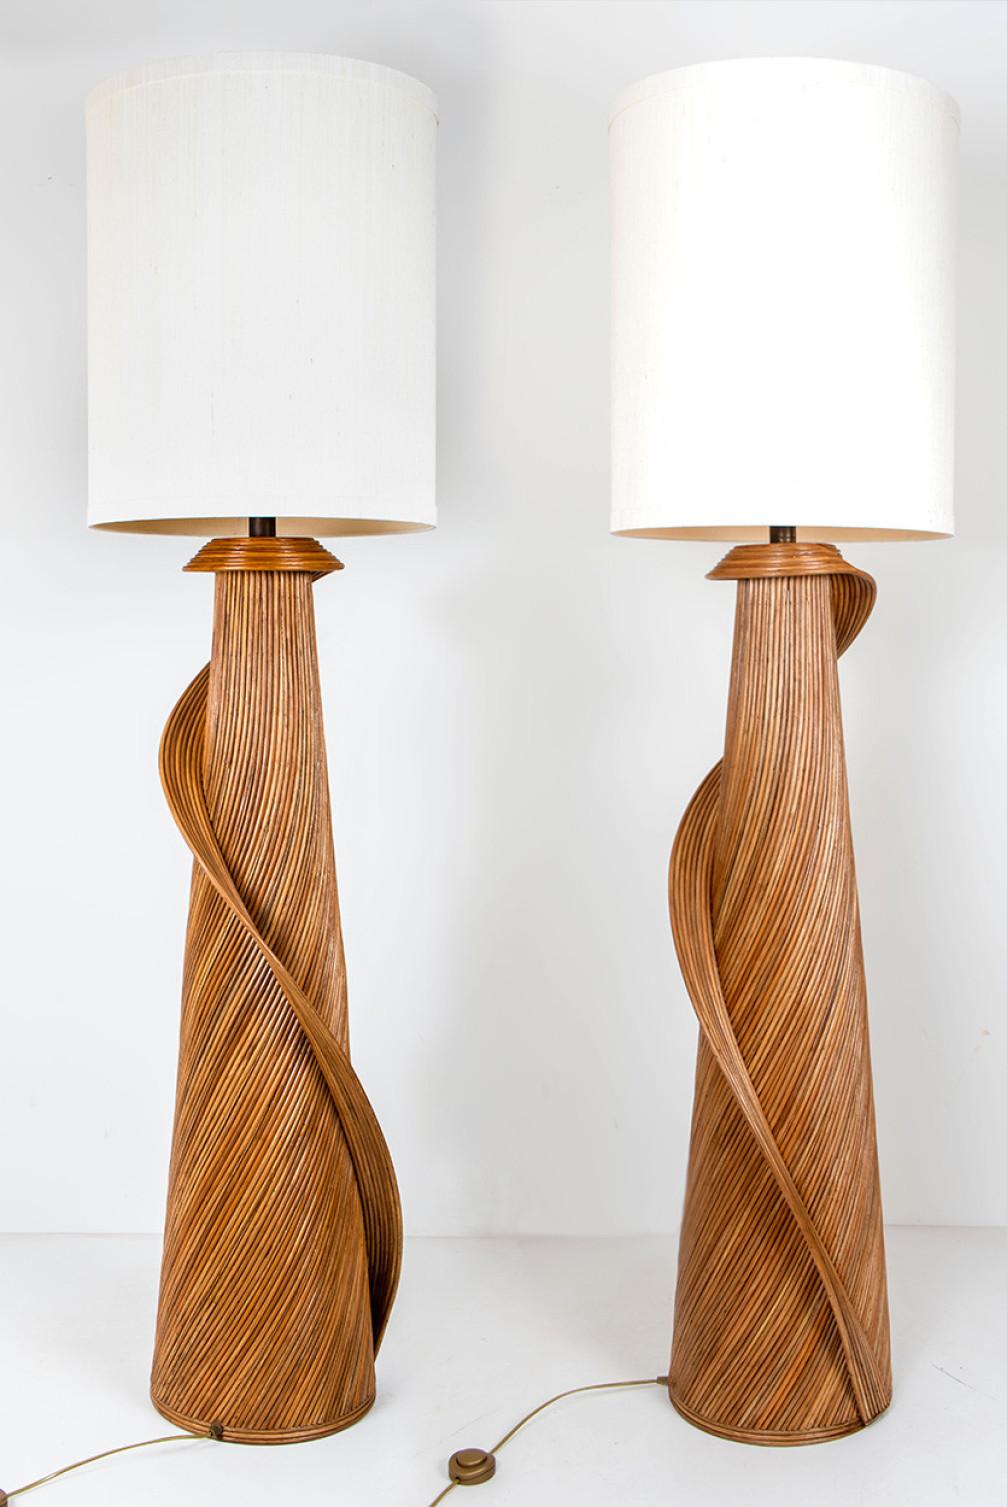 Other 1 of the 2 of Huge Eco-friendly Rattan Floor Lamps by René Houben (H78.7